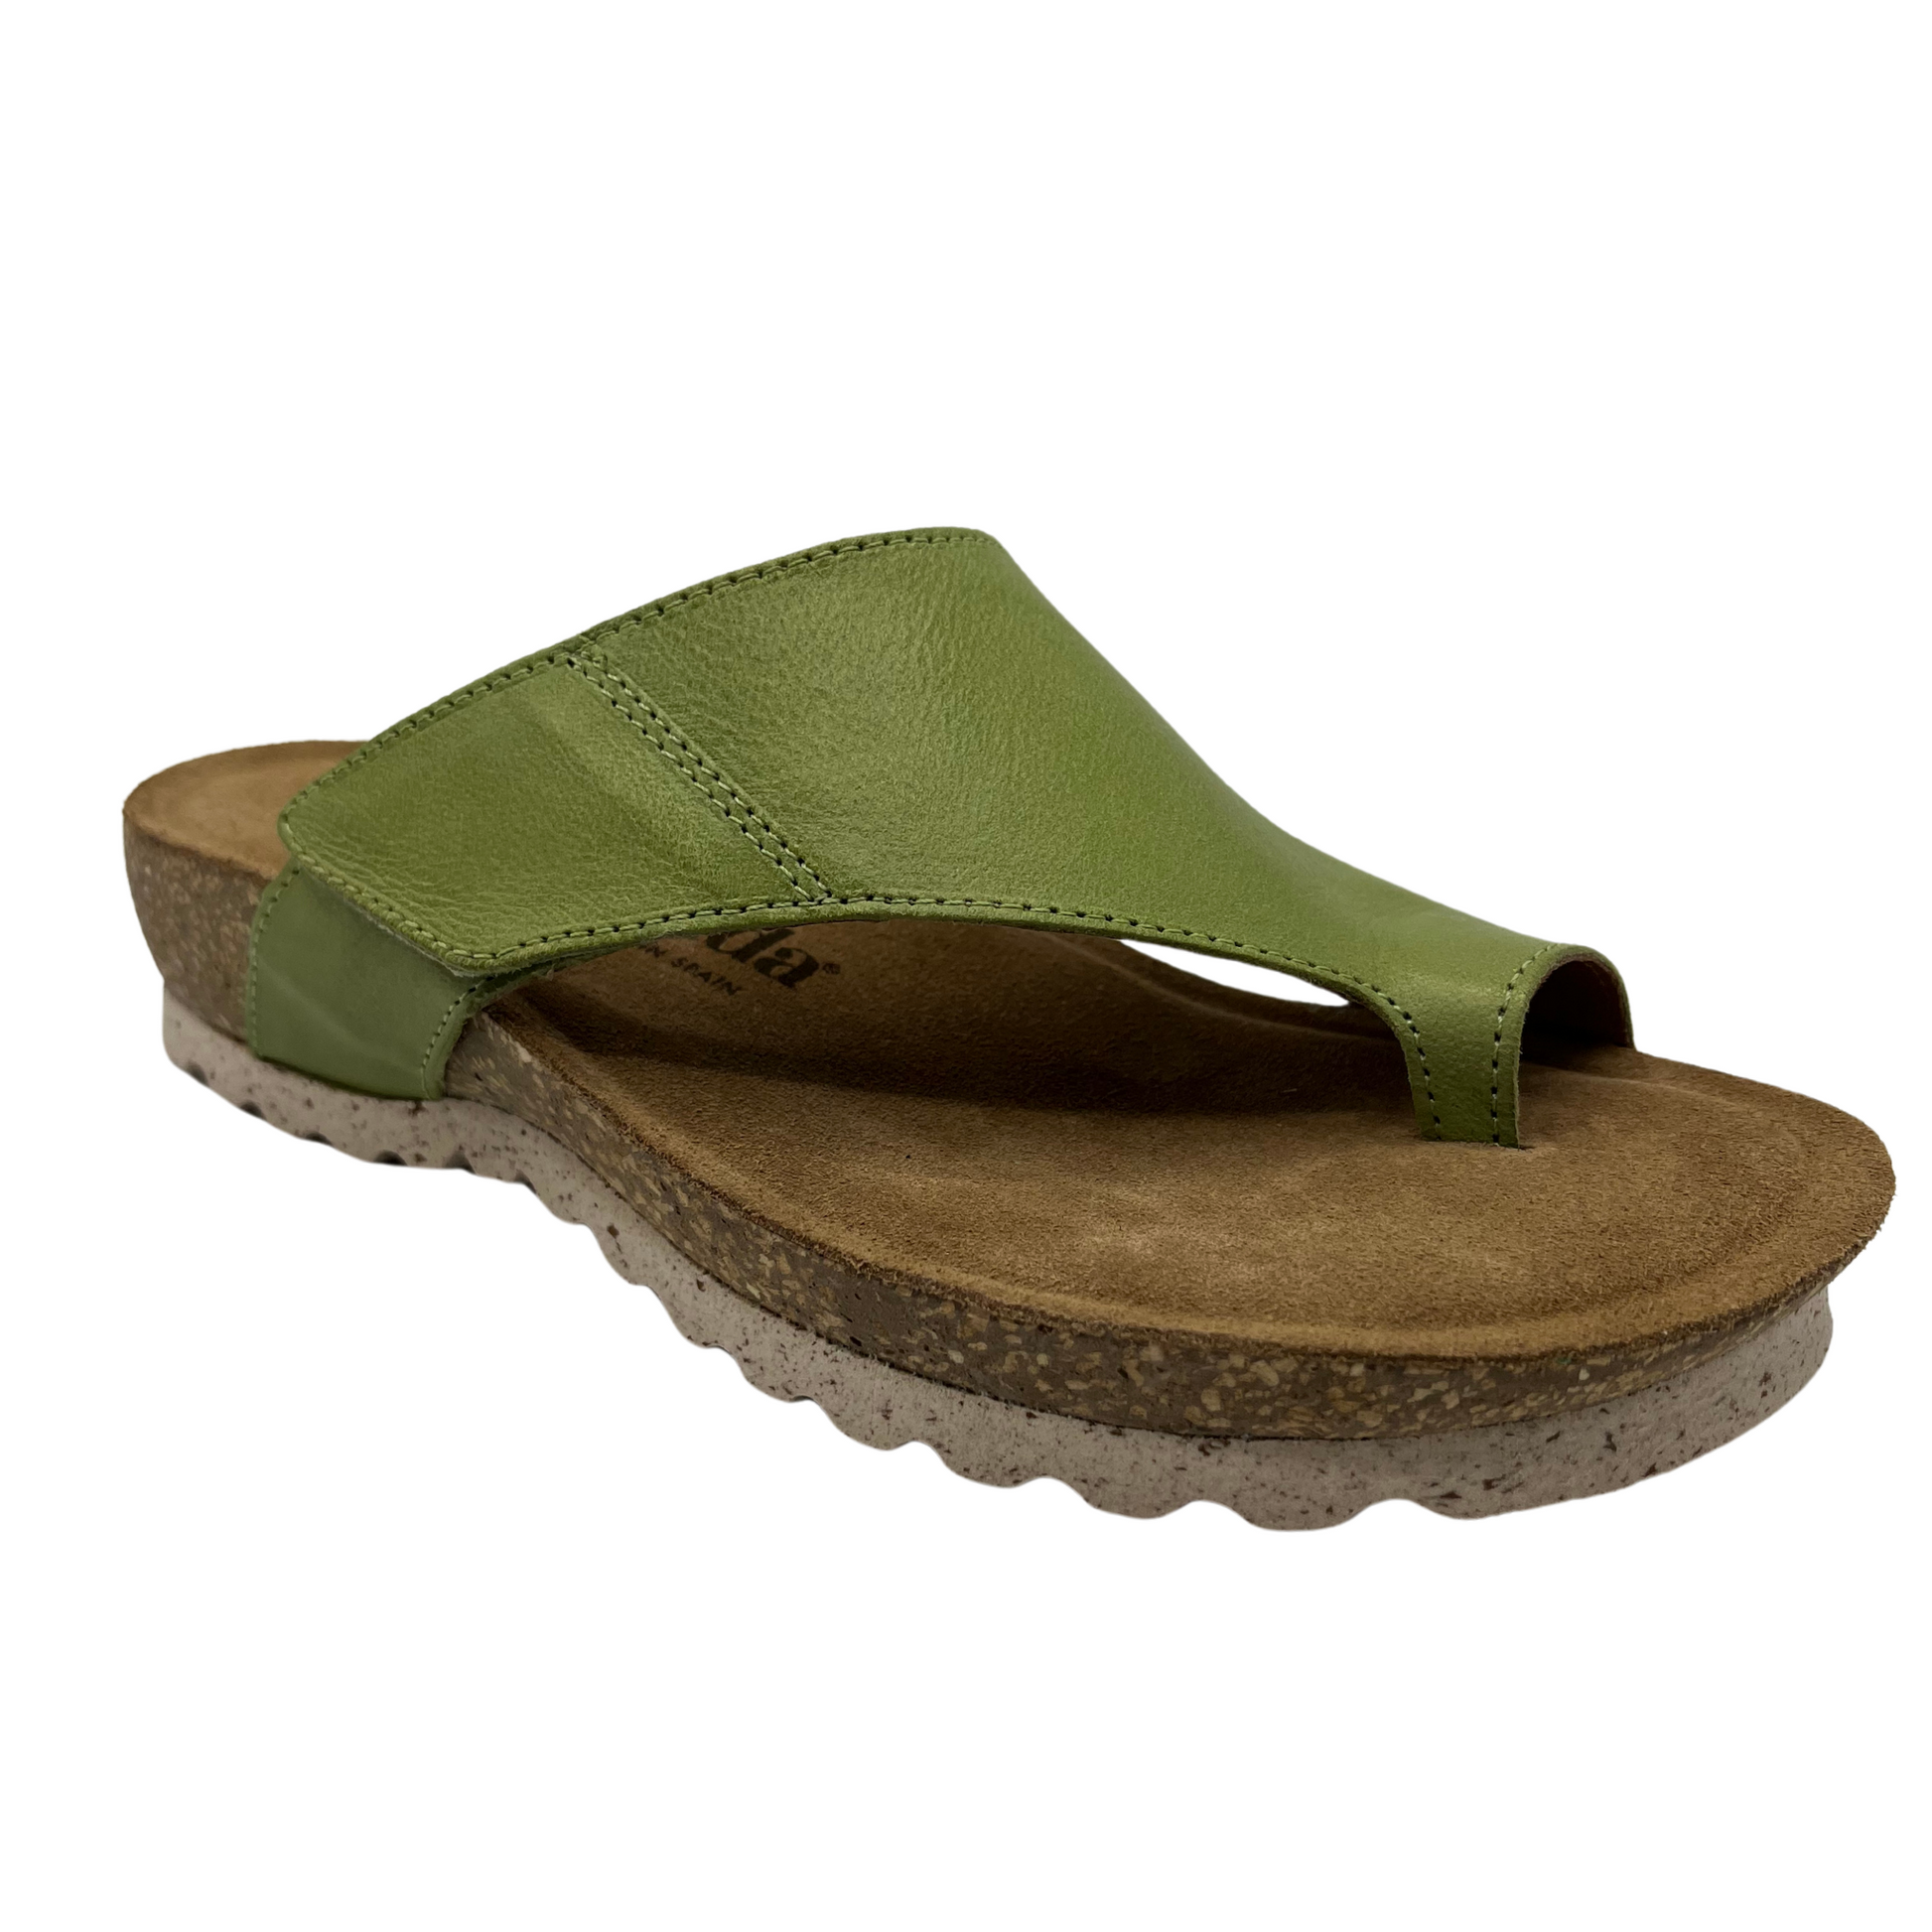 45 degree angled view of green leather sandal with cork footbed